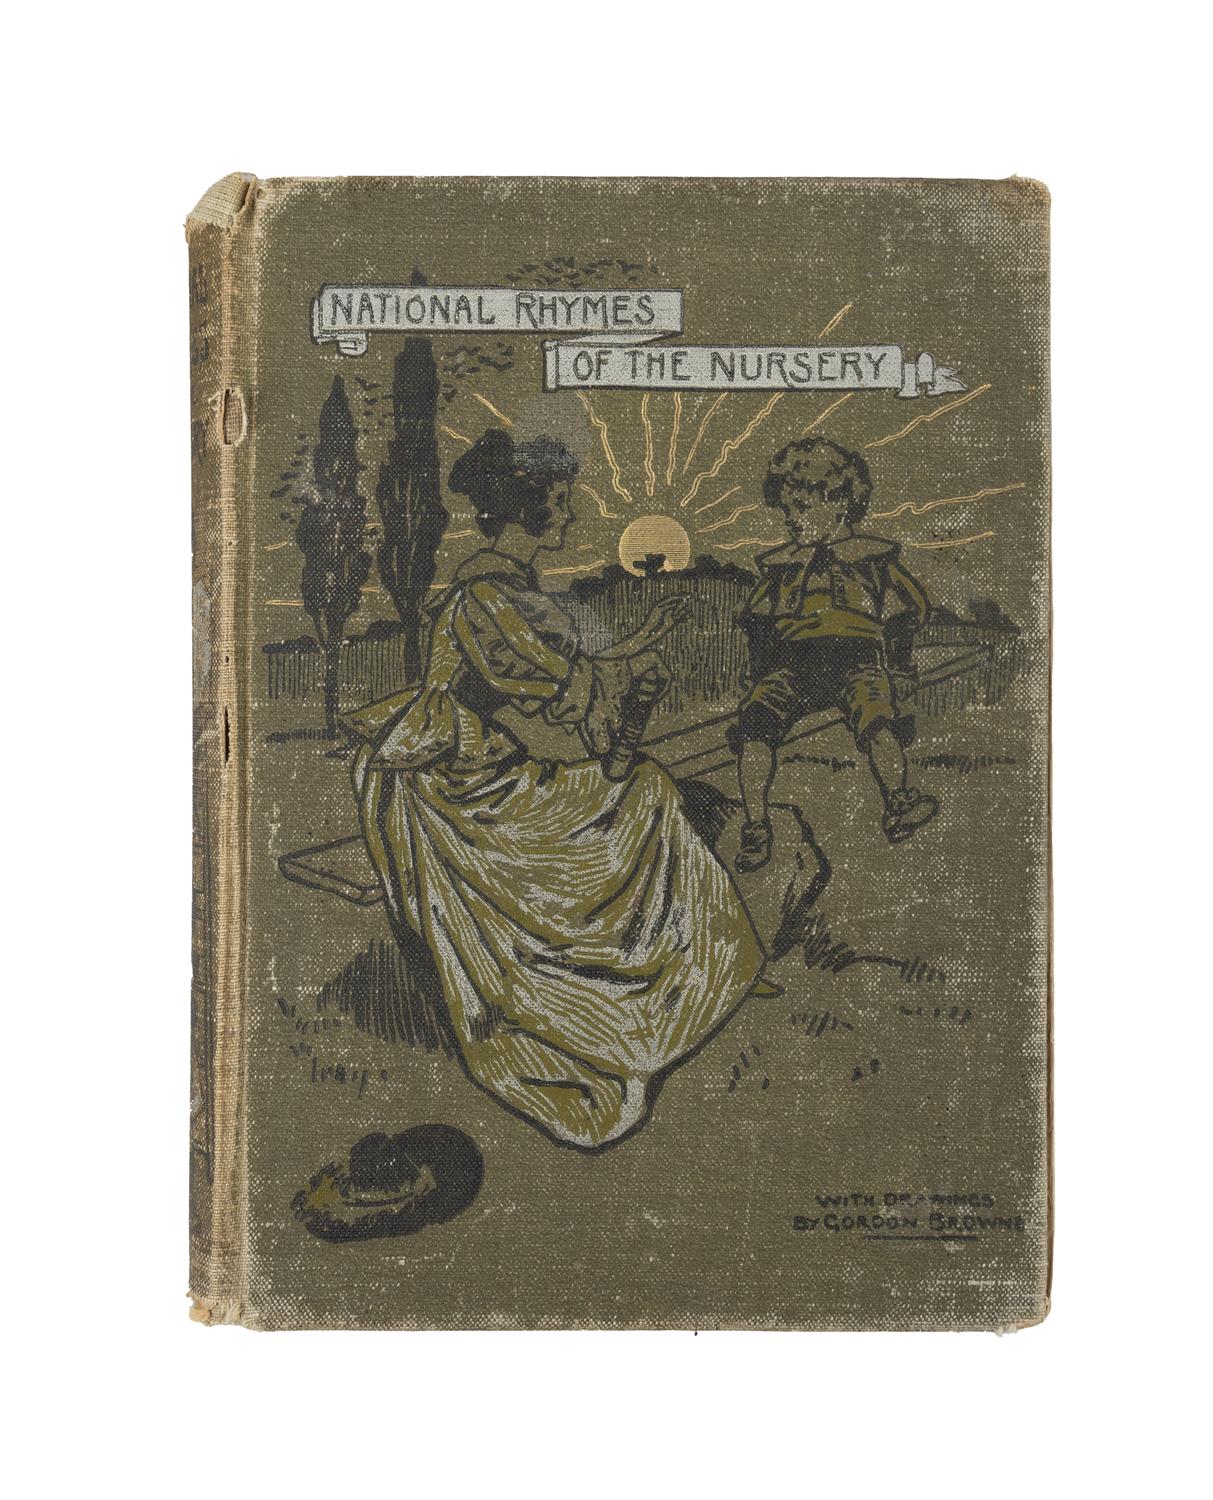 CHILDREN'S STORIES PUBLISHED BY FREDERICK A. STOKES COMPANY, NEW YORK: Comprising: DICKENS, C. - Image 10 of 24